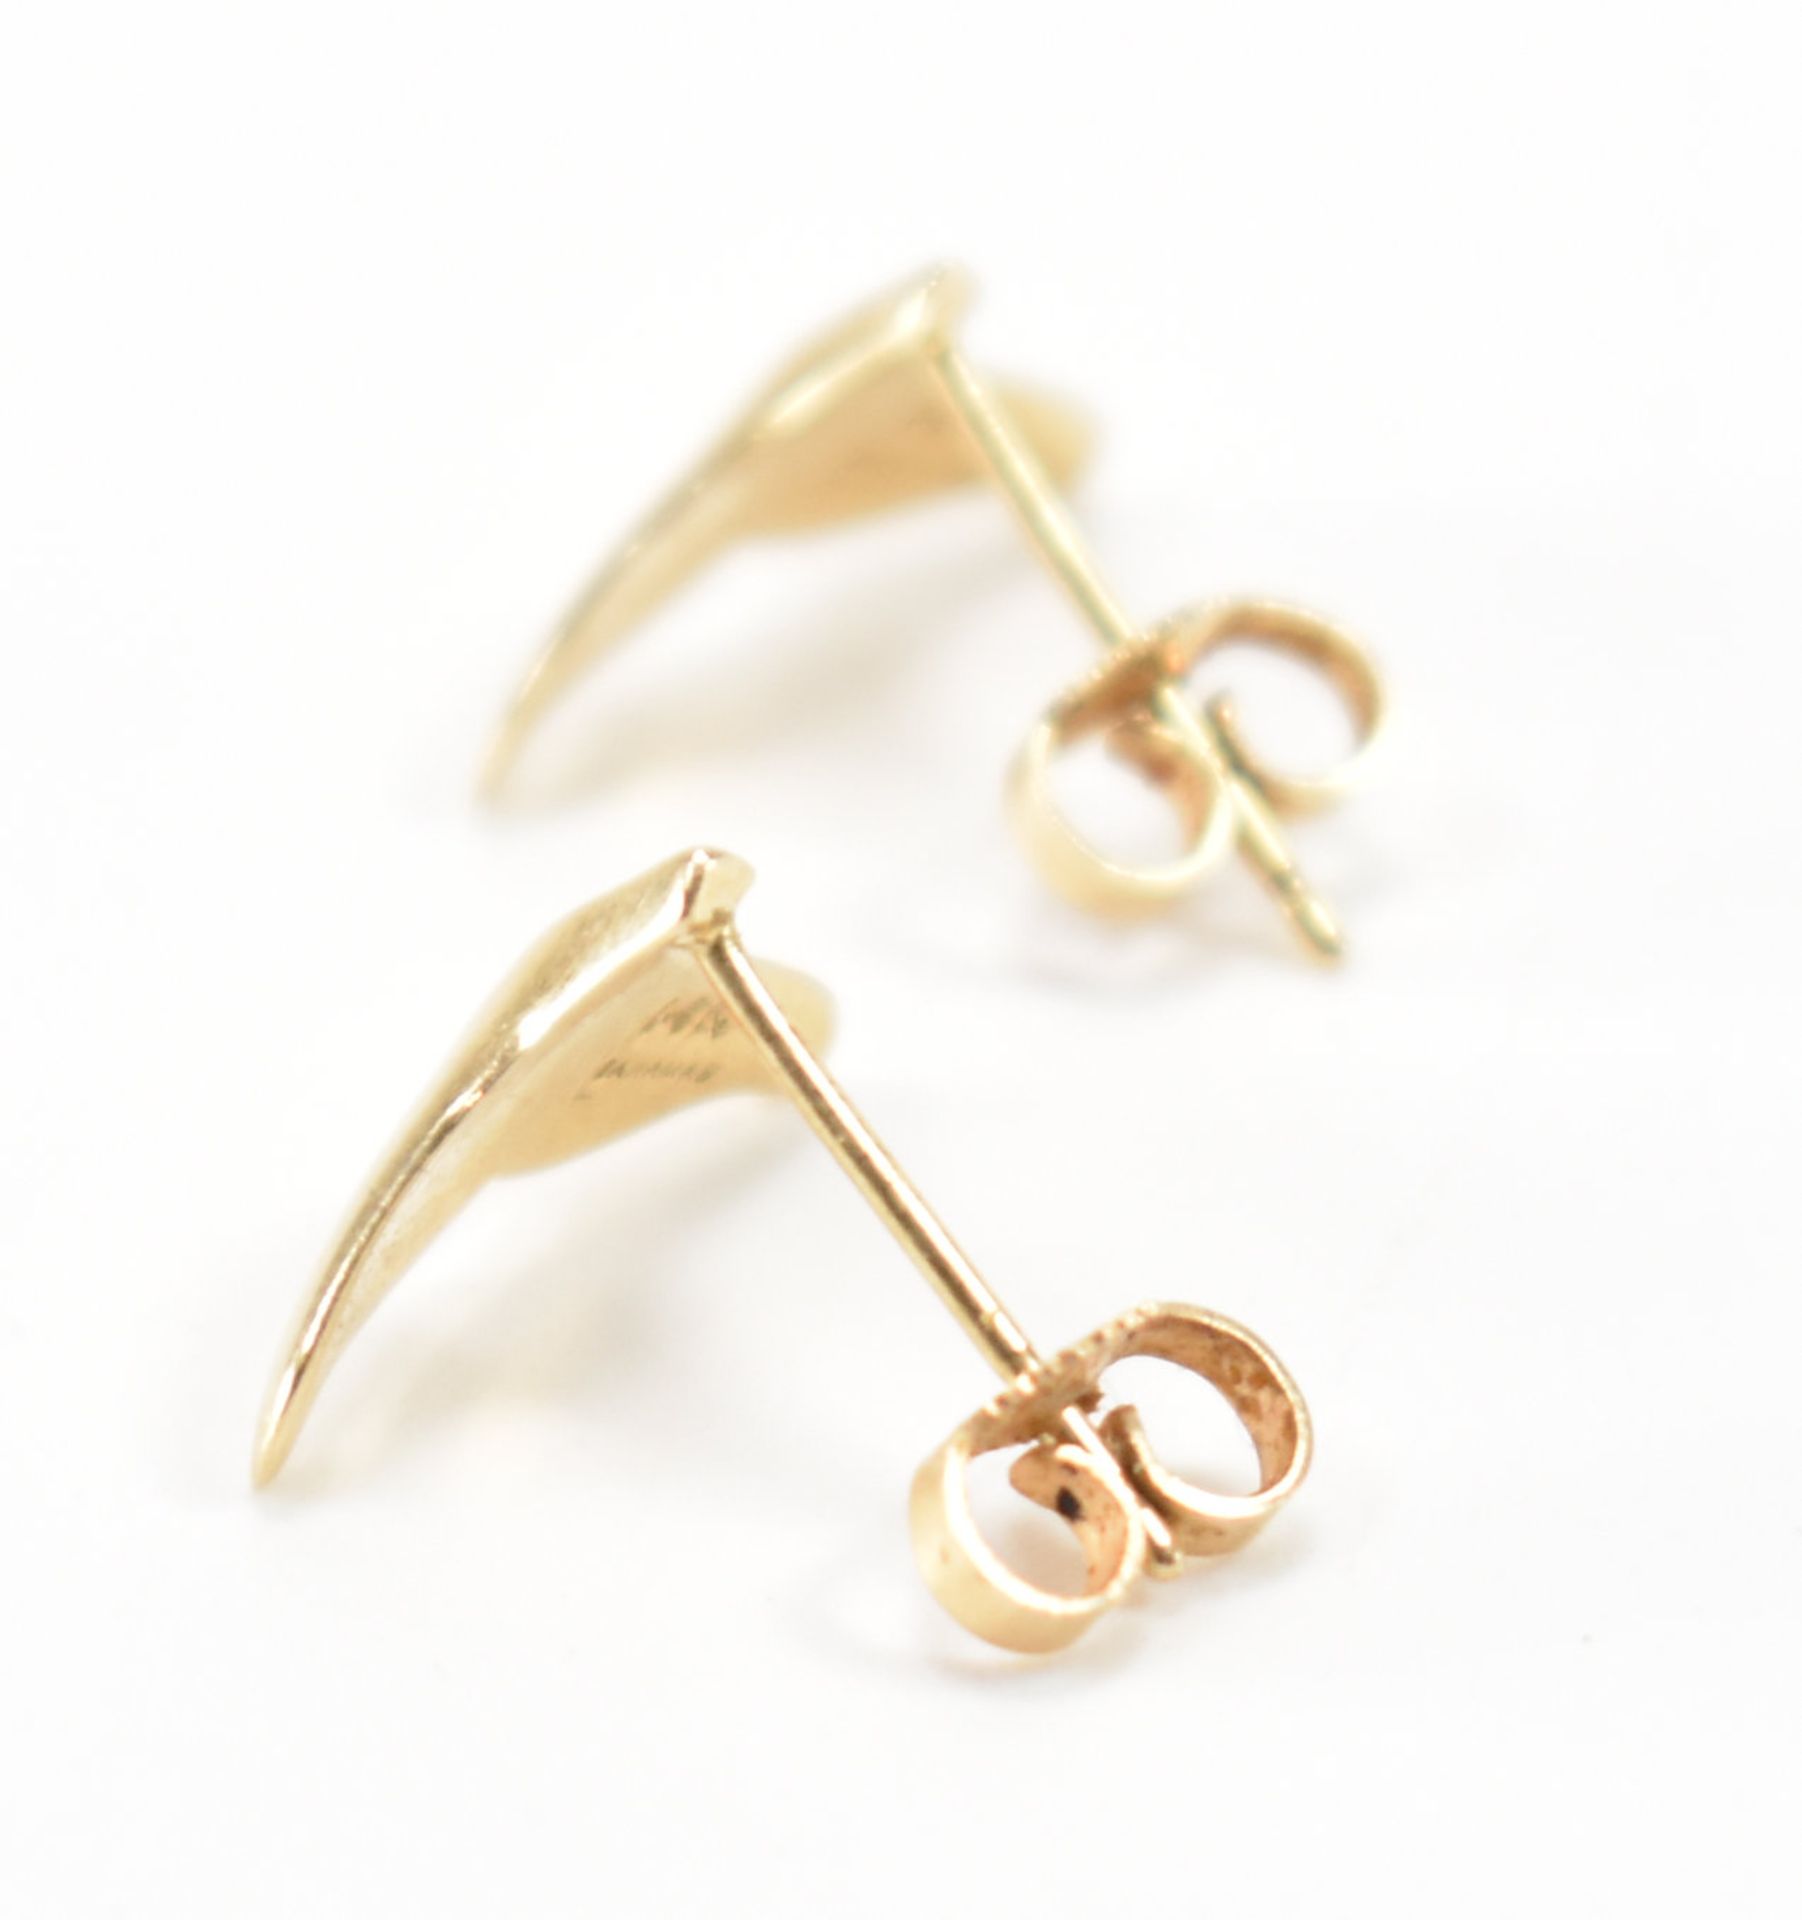 PAIR OF GOLD WHALE TAIL STUD EARRINGS - Bild 2 aus 4